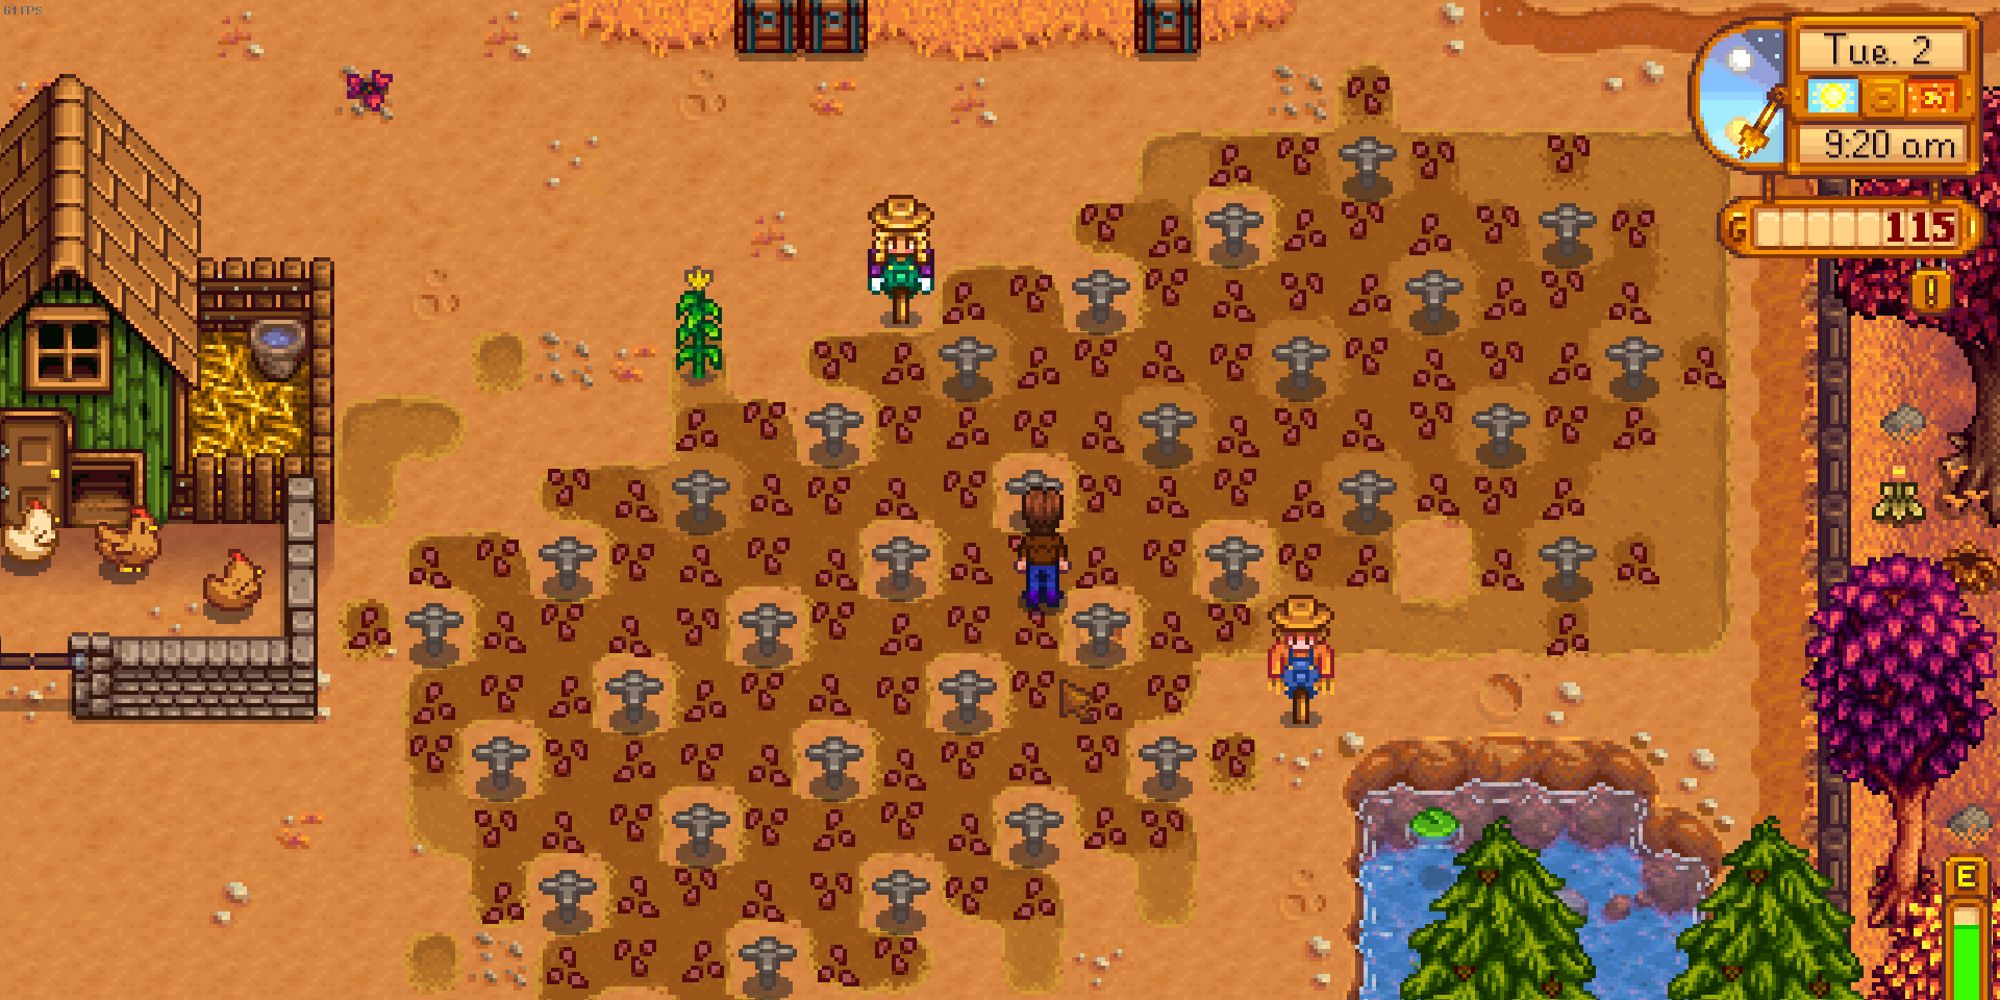 stardew basic sprinkler layout with the sprinklers staggered